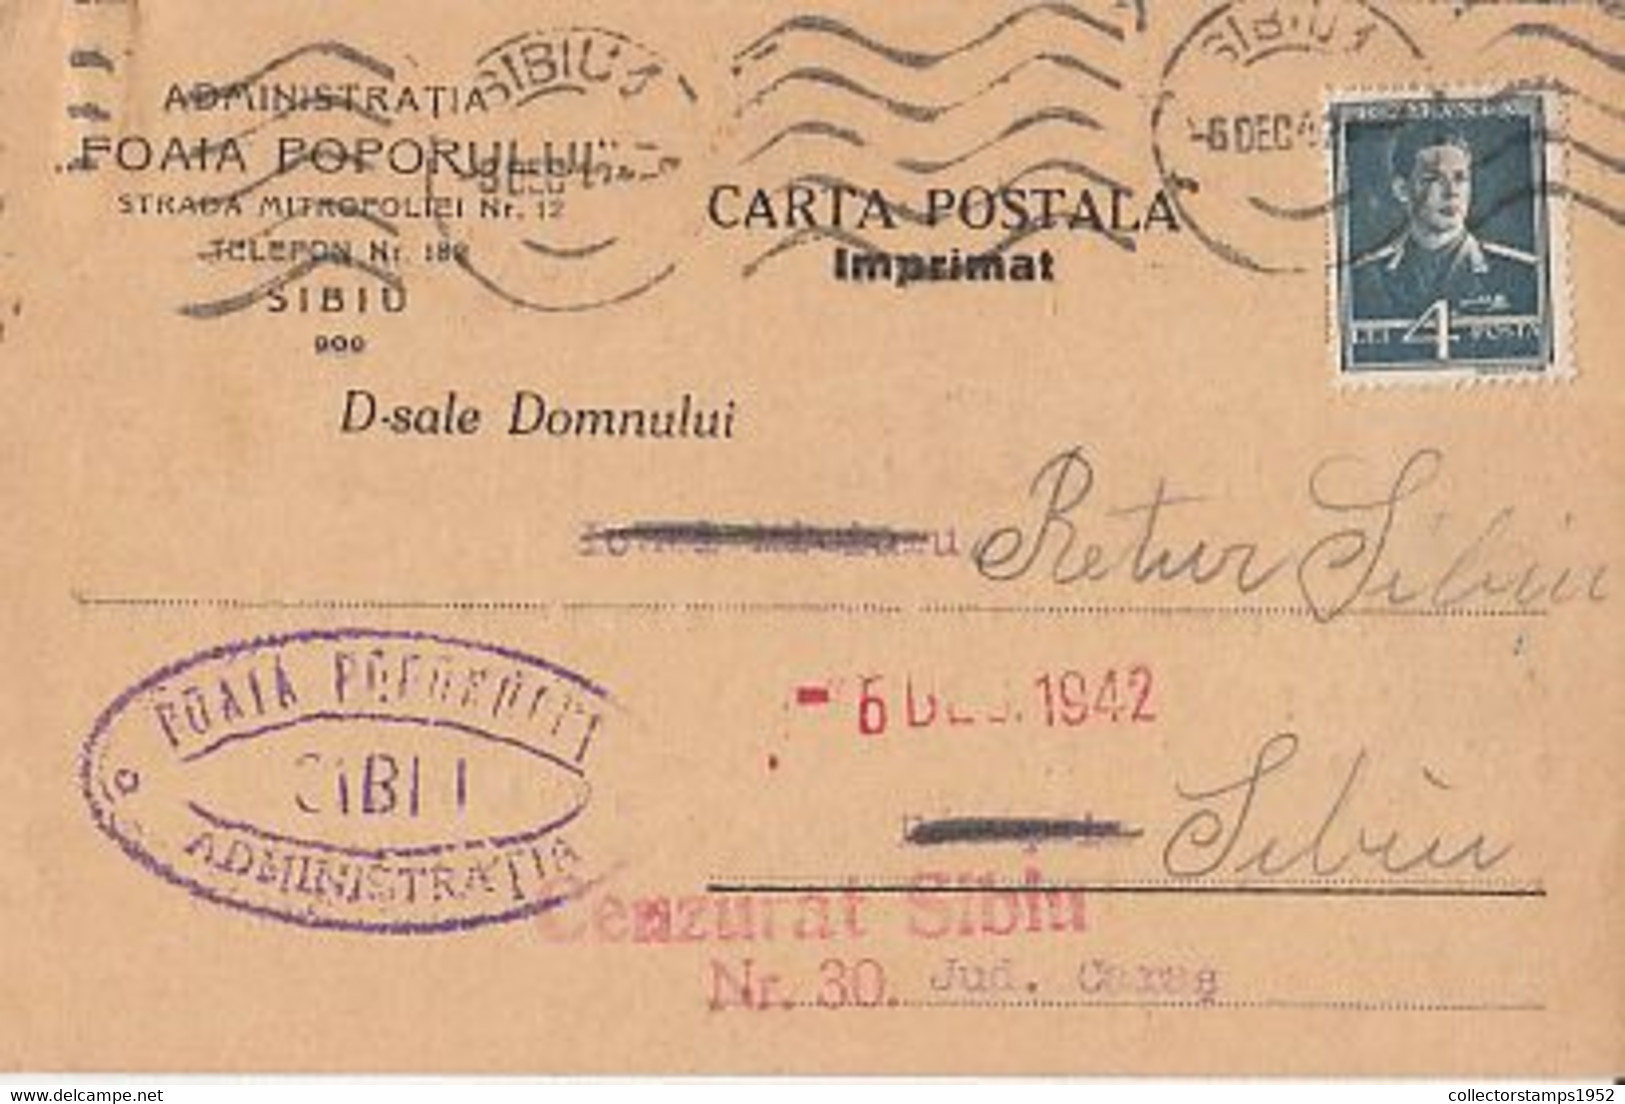 93081- KING MICHAEL STAMP ON POSTCARD, NEWSPAPER HEADER, CENZORED SIBIU NR 30, 1942, ROMANIA - Lettres 2ème Guerre Mondiale